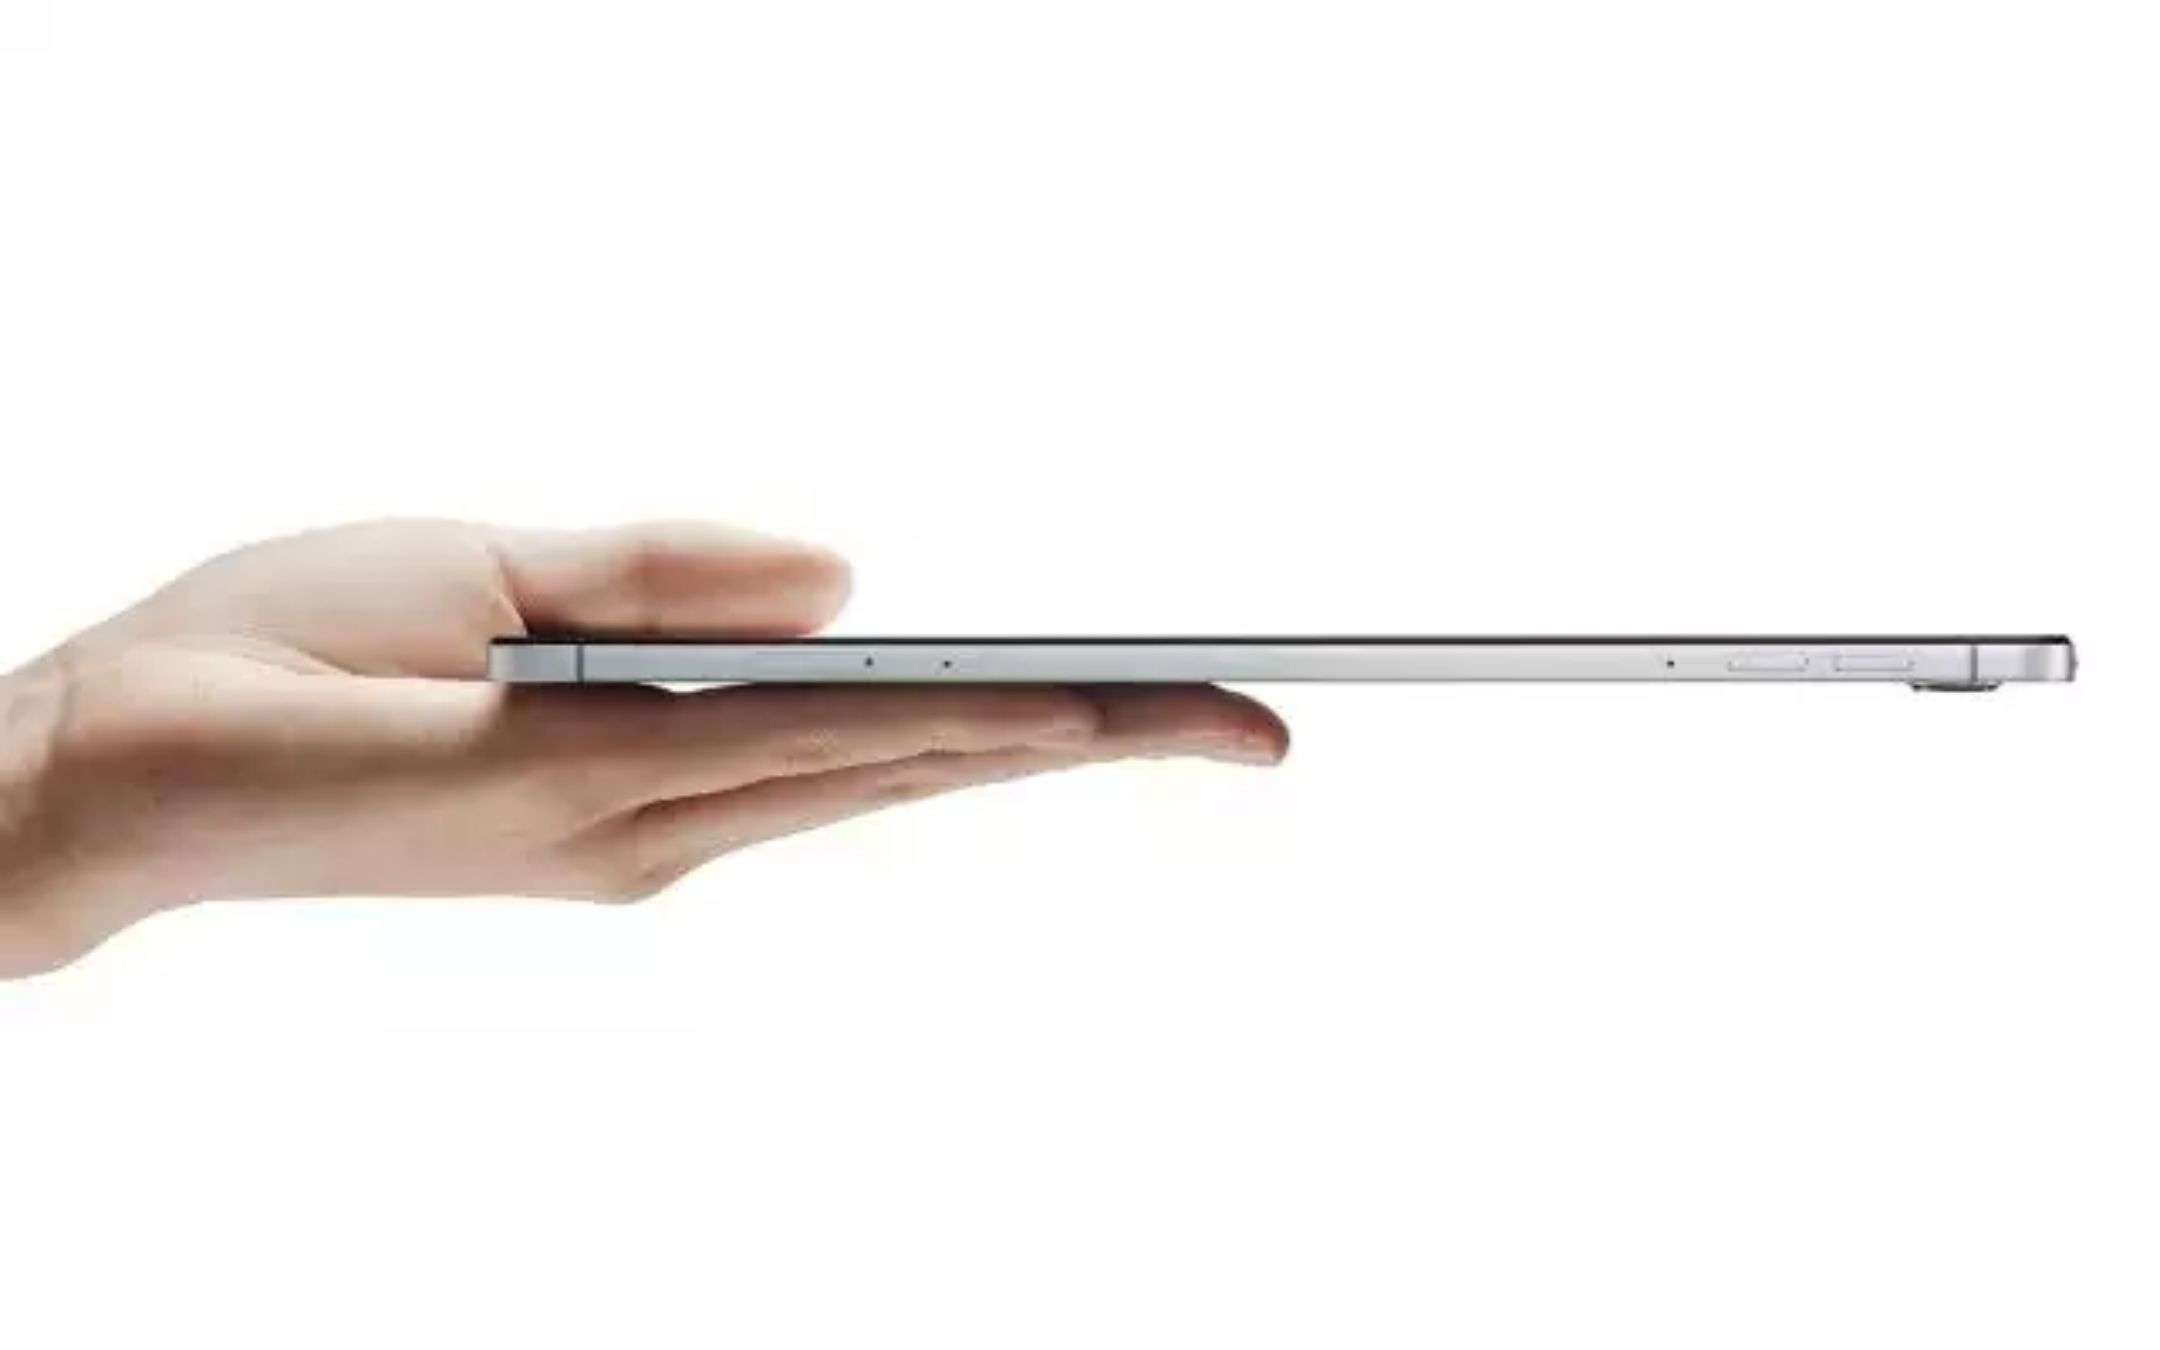 OPPO spinge sui tablet, due nuovi device in cantiere: leak clamoroso